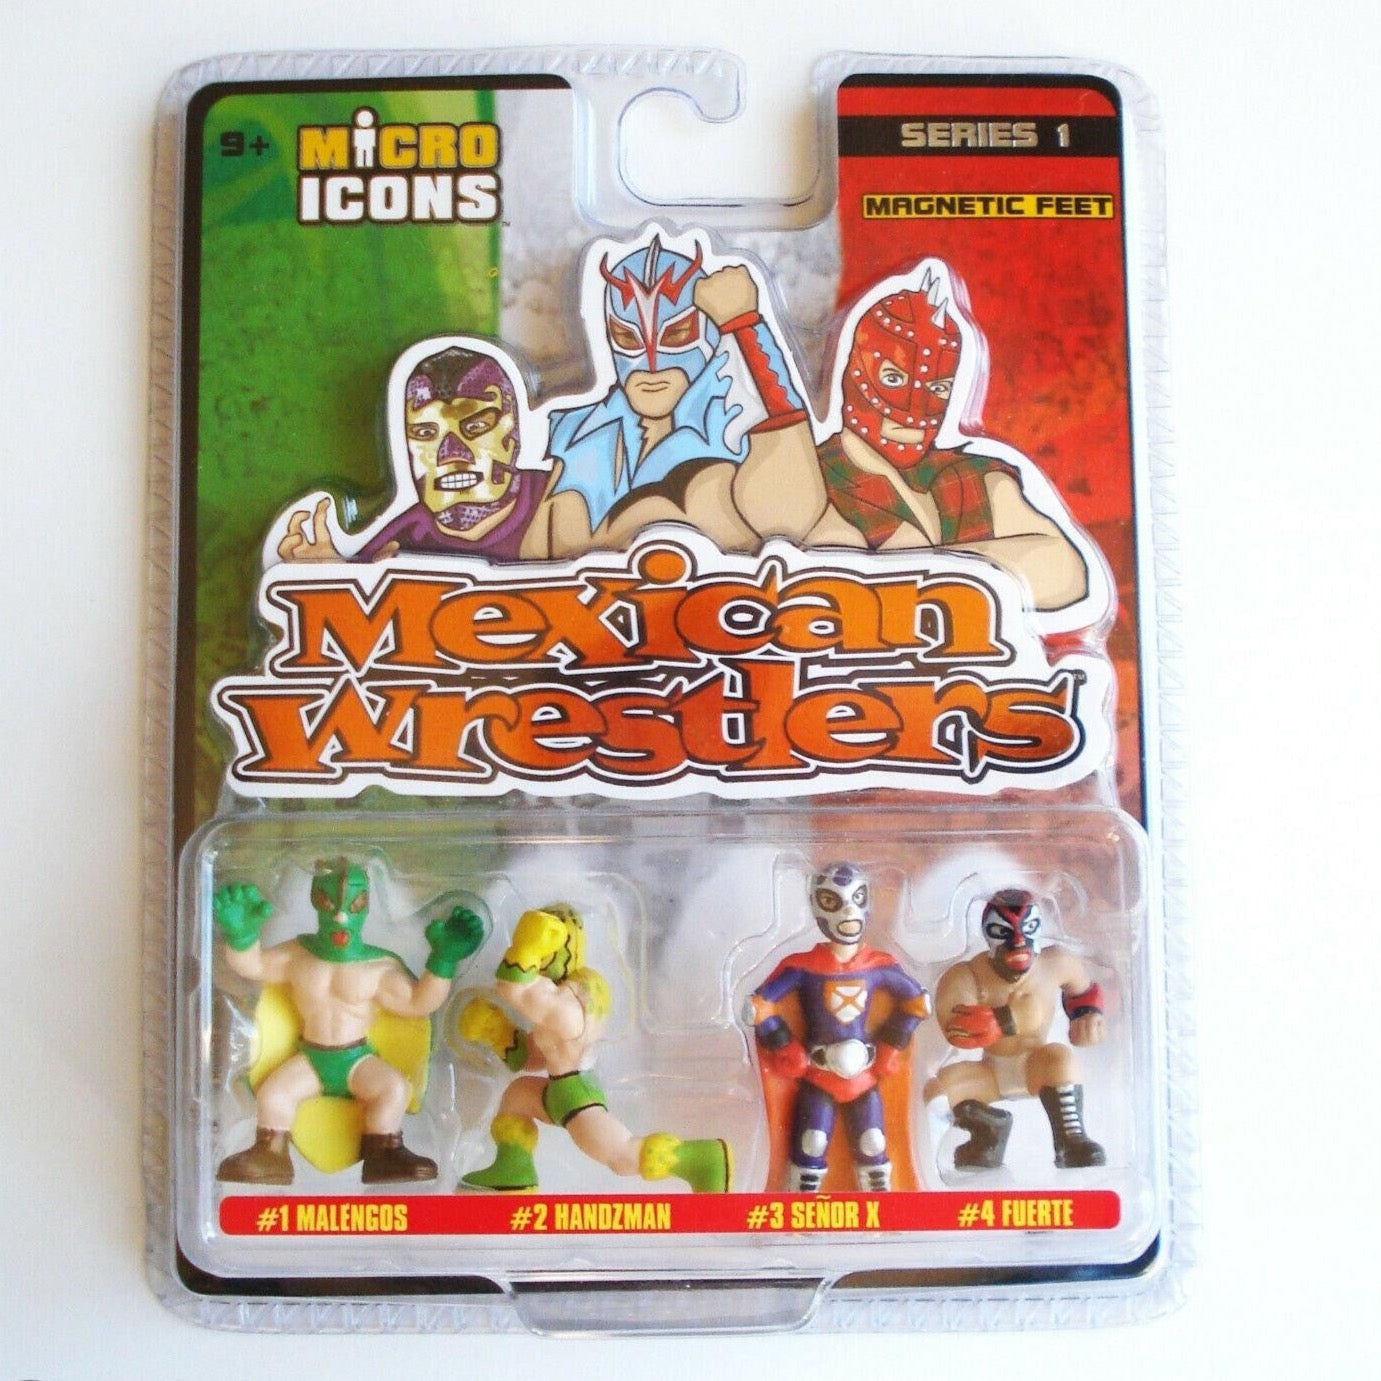 X-Concepts Micro Icons Mexican Wrestlers